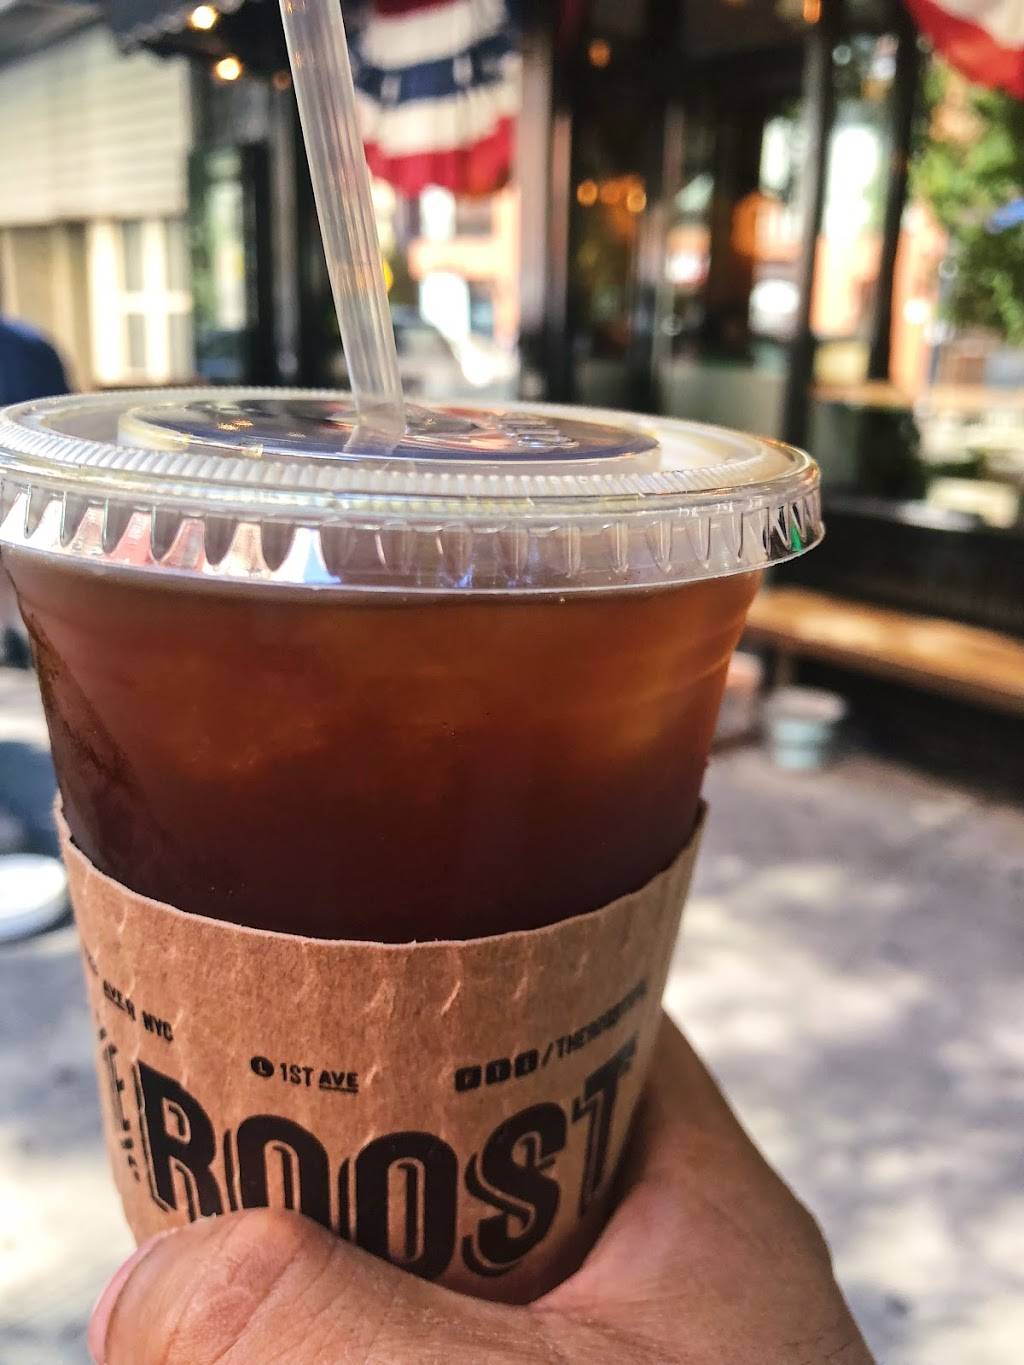 The Roost | cafe | 222 Avenue B, New York, NY 10009, USA | 6469186700 OR +1 646-918-6700